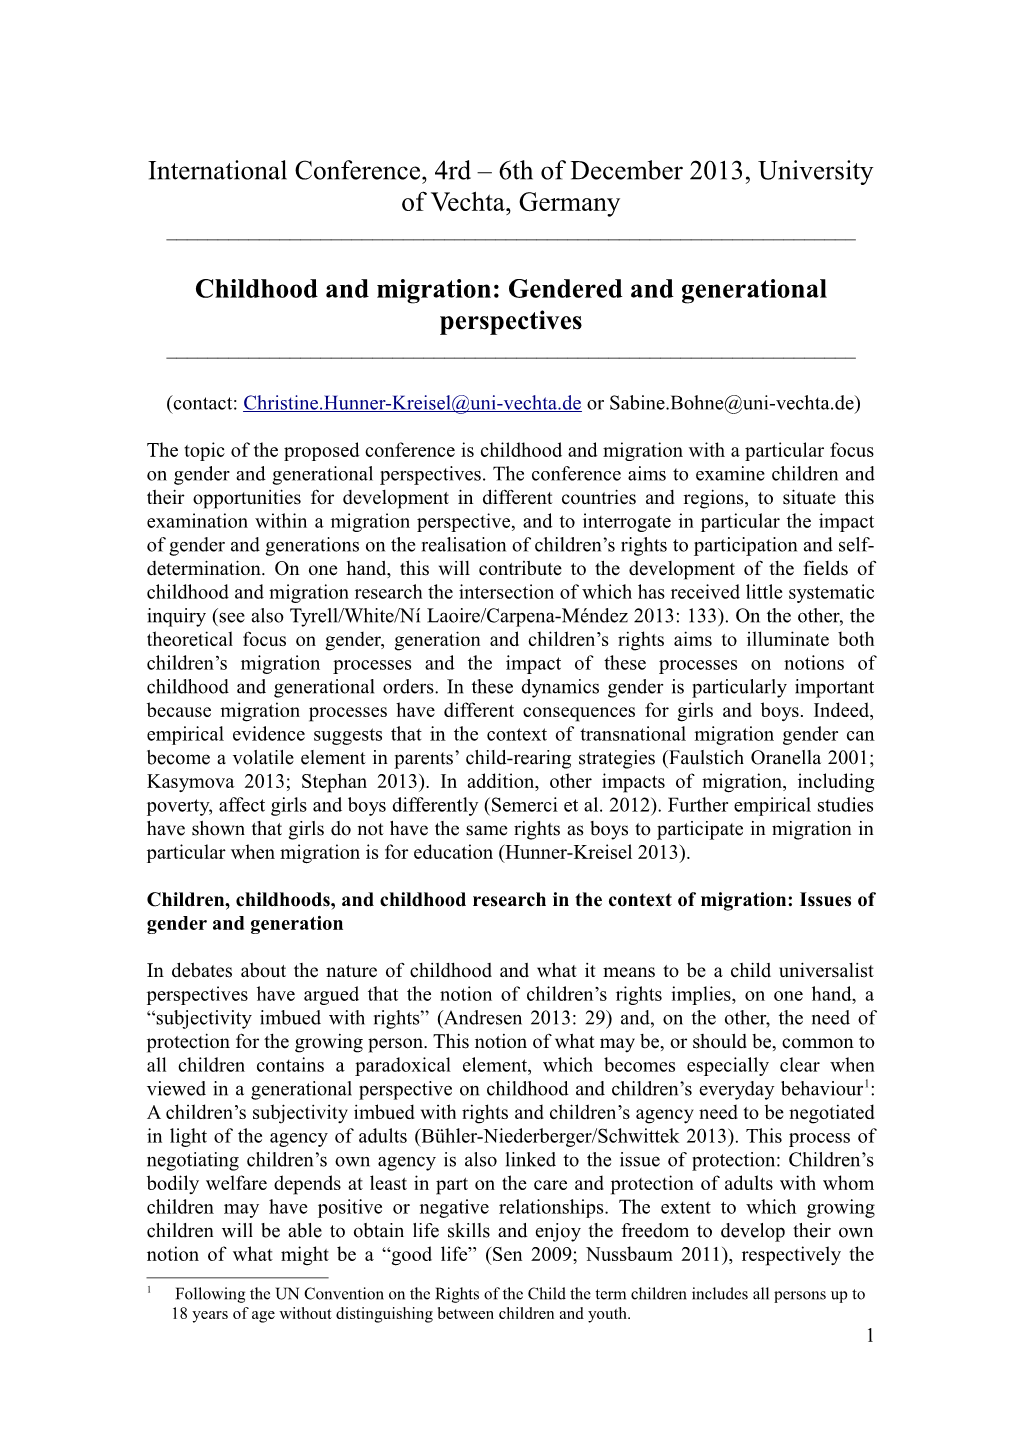 Childhood and Migration: Gendered and Generational Perspectives